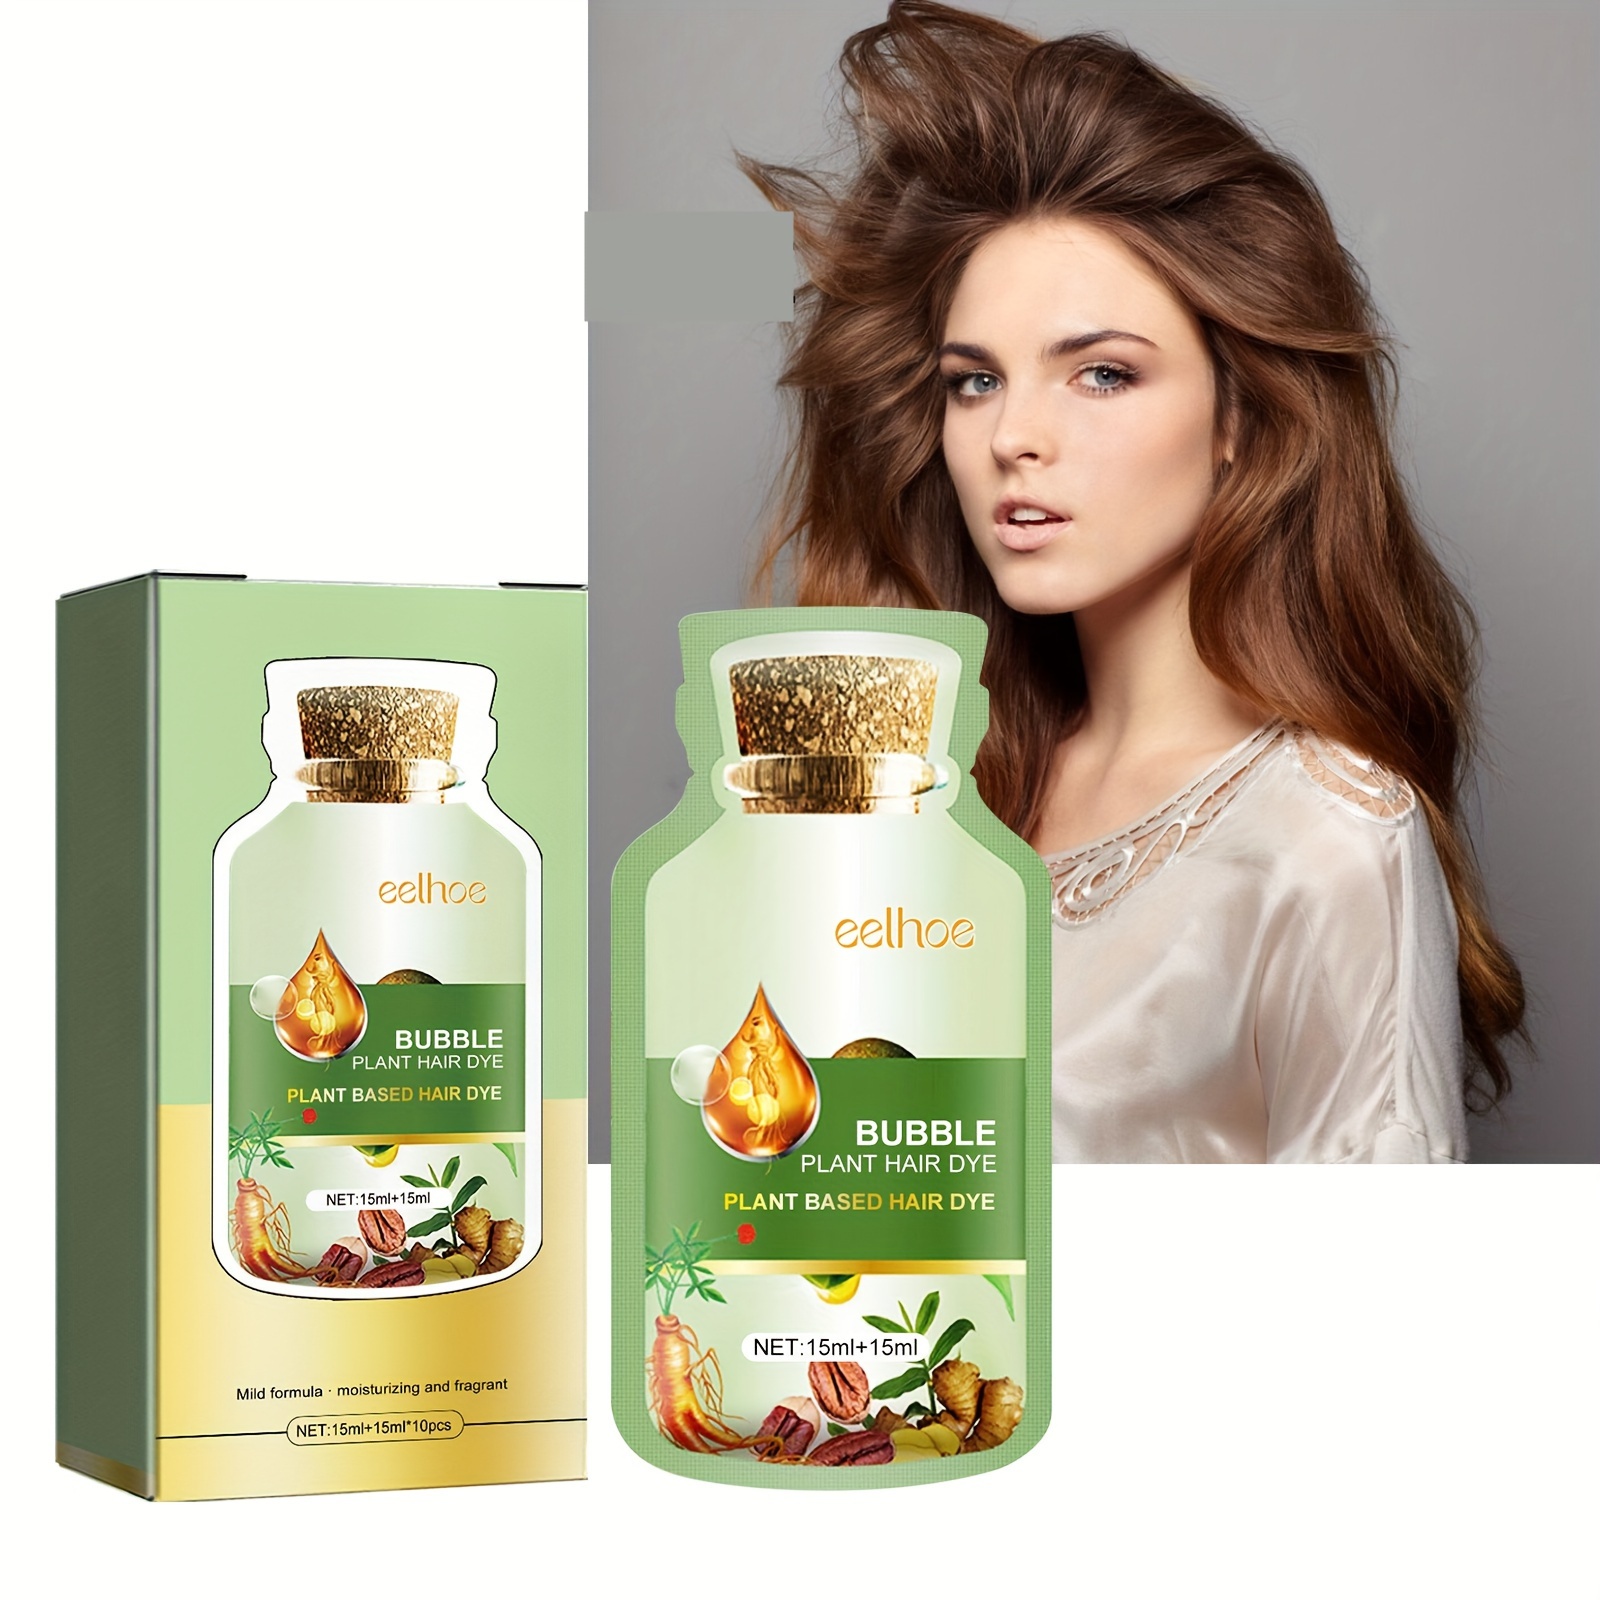 

Bubble Hair Dye Product, Natural Plant Hair Dye To Cover White Hair, Pure Plant Extract Hair Dye Product